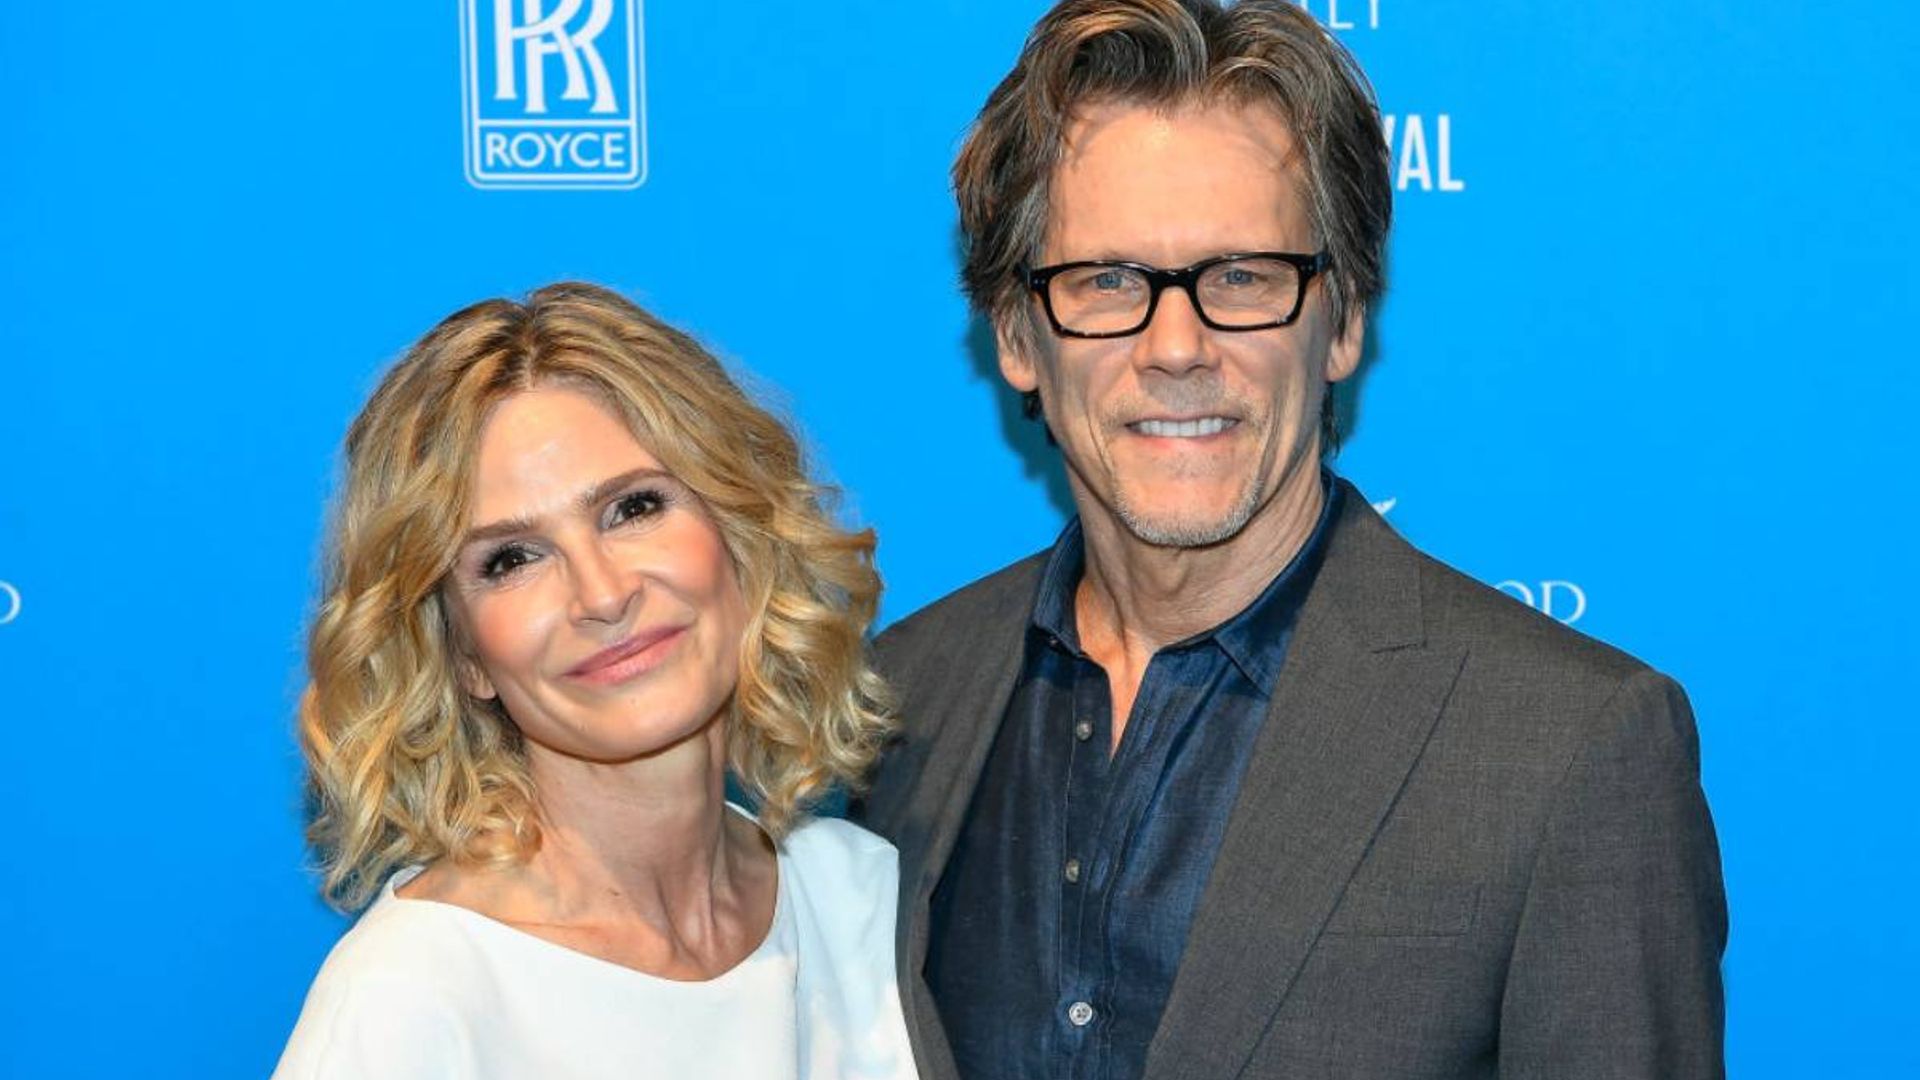 Kyra Sedgwick's swimsuit selfie with Kevin Bacon is too good to miss